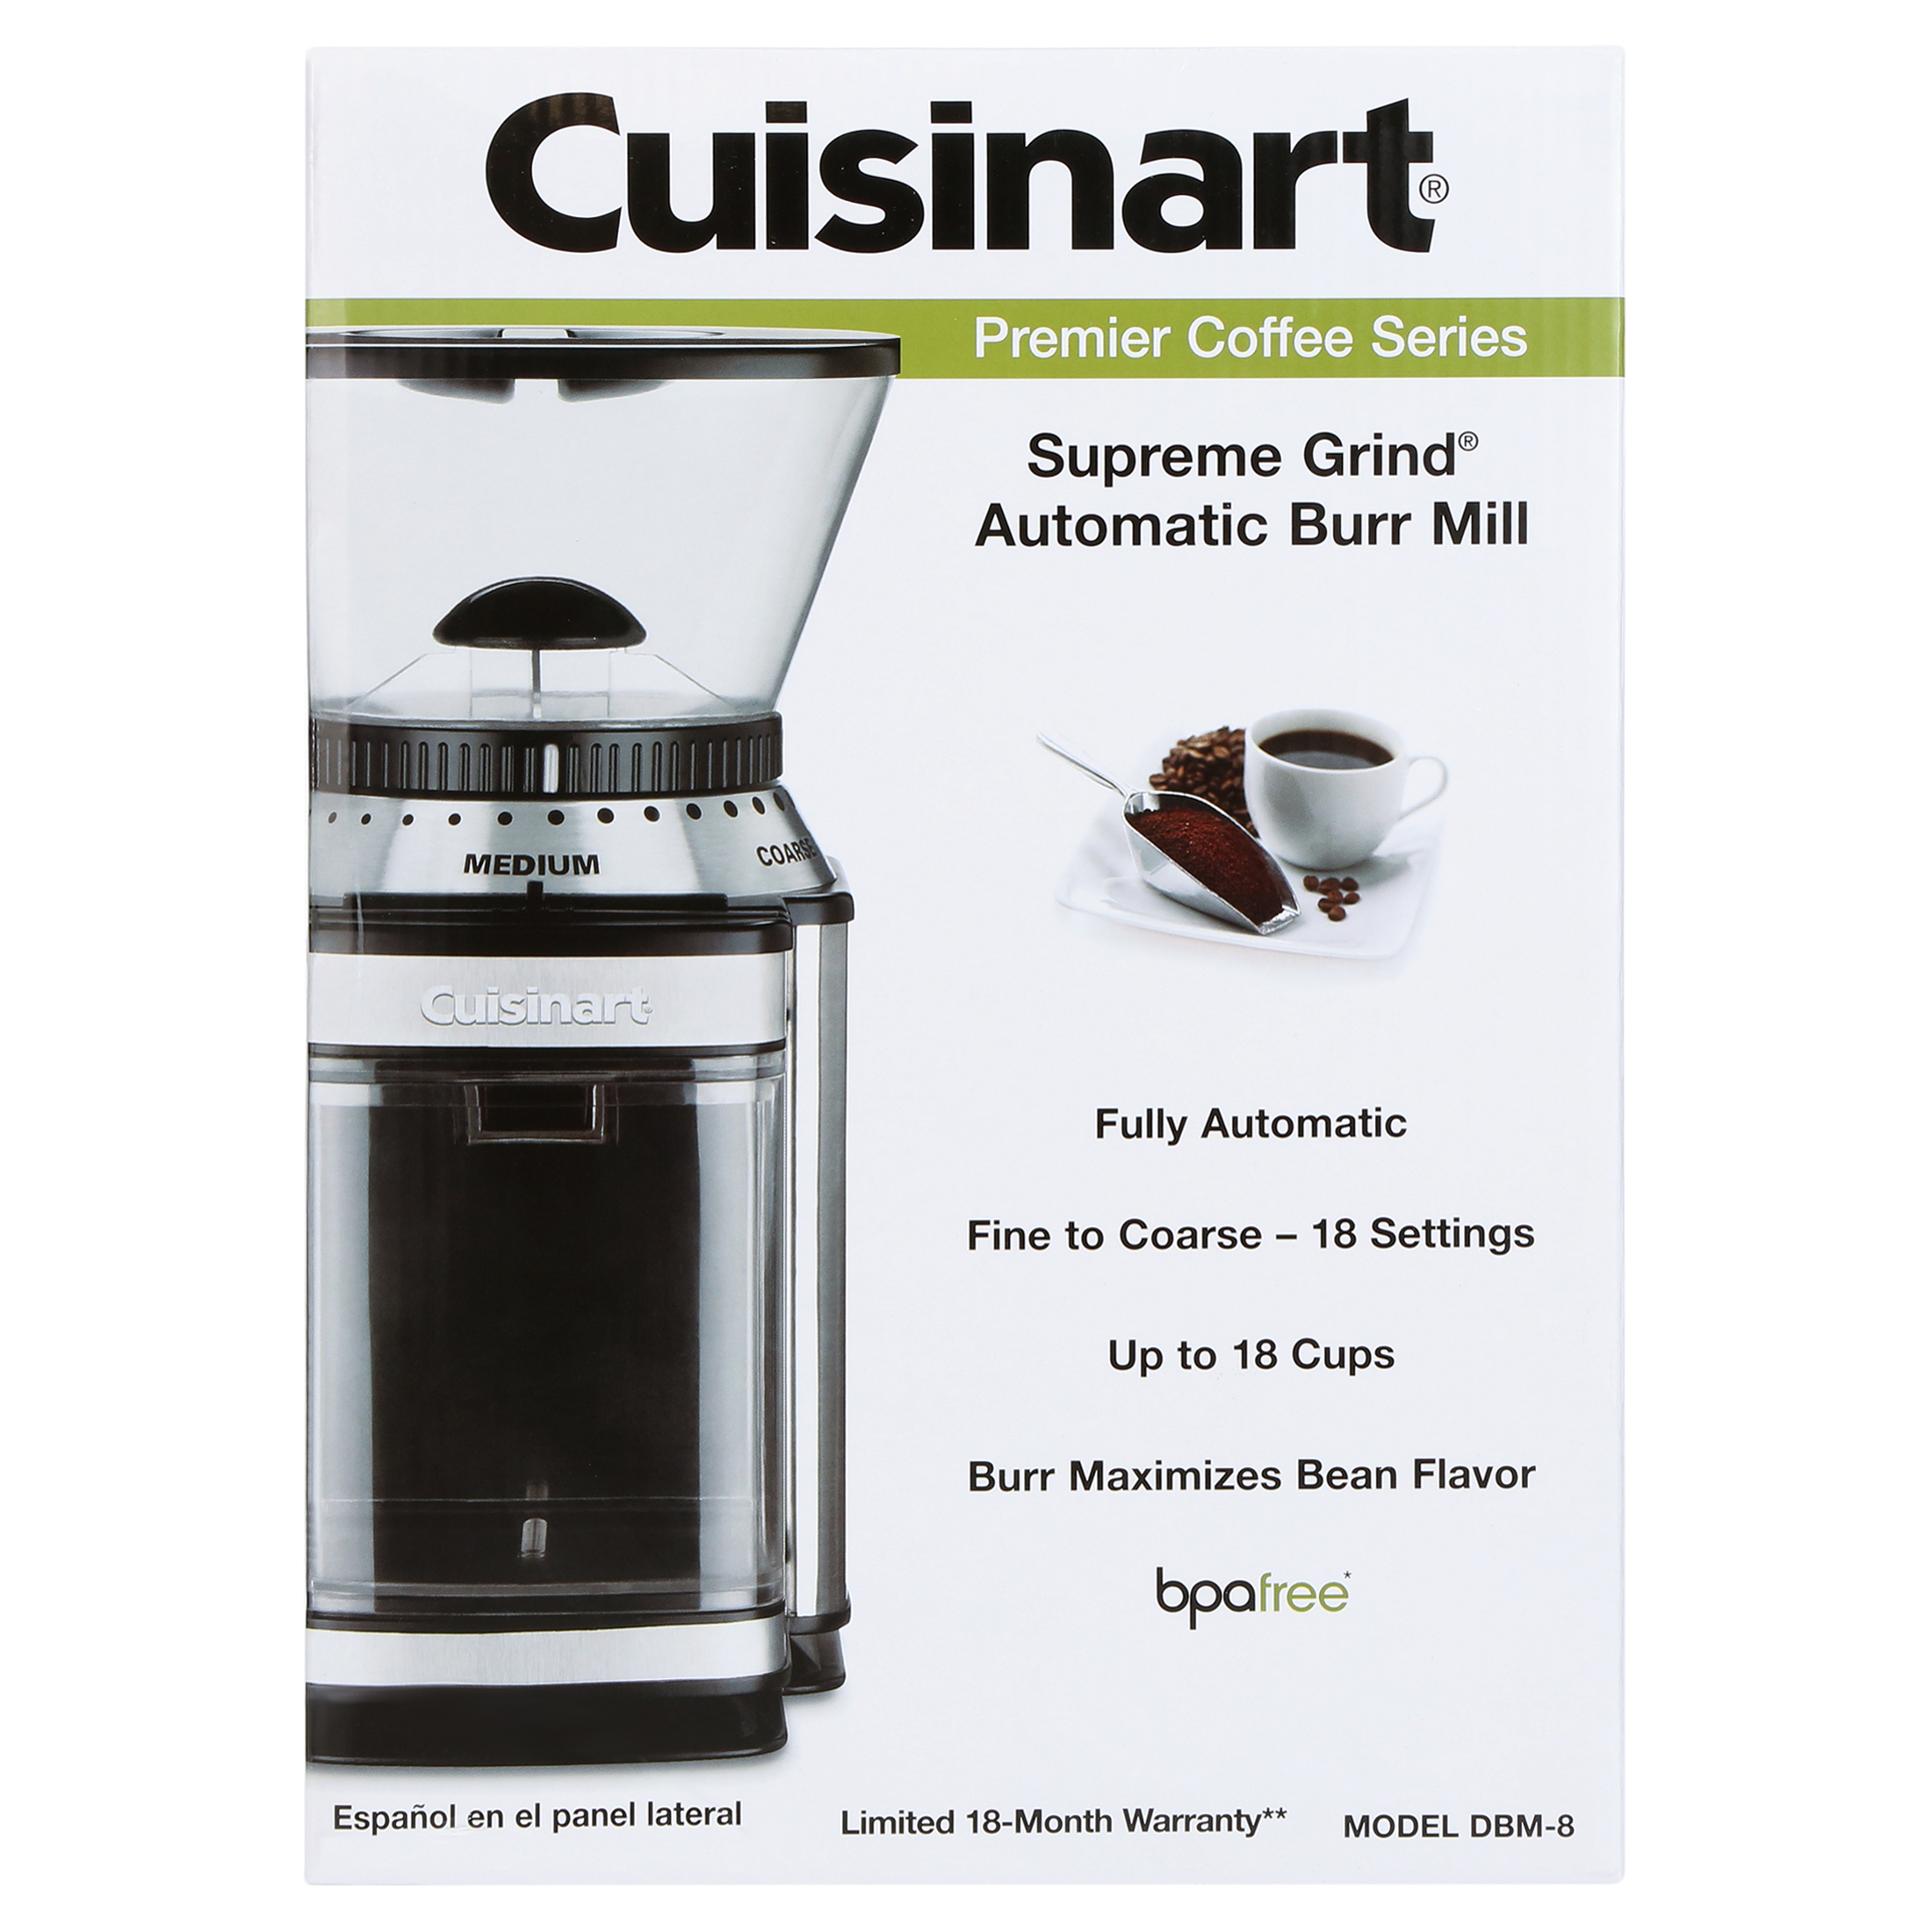 Cuisinart Supreme Grind™ 18 Cup Stainless Steel Burr Coffee Grinder - image 5 of 10